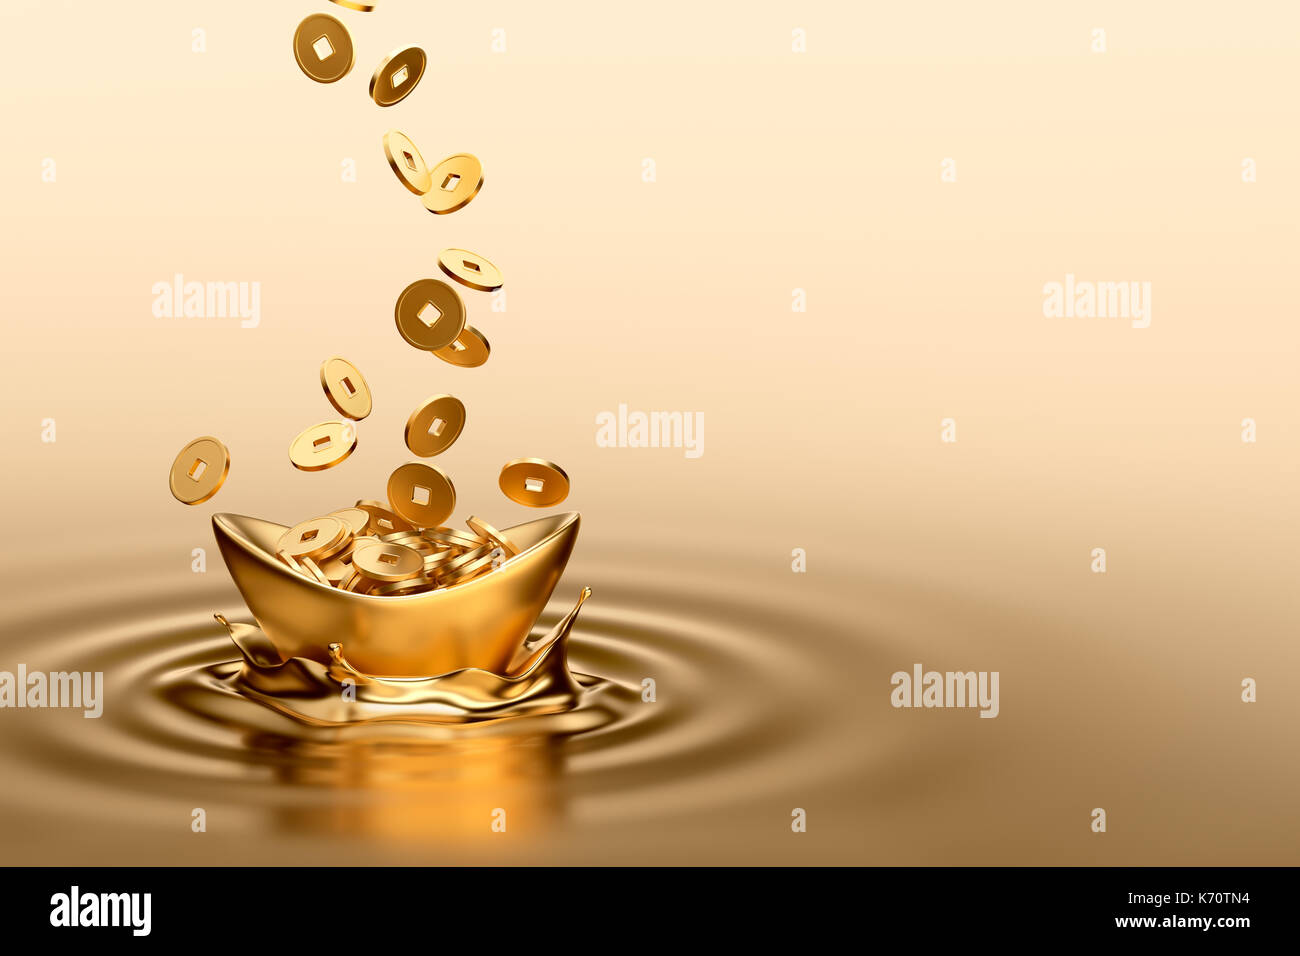 Gold sycee (Yuanbao) and gold coins dropping on liquid gold Stock Photo